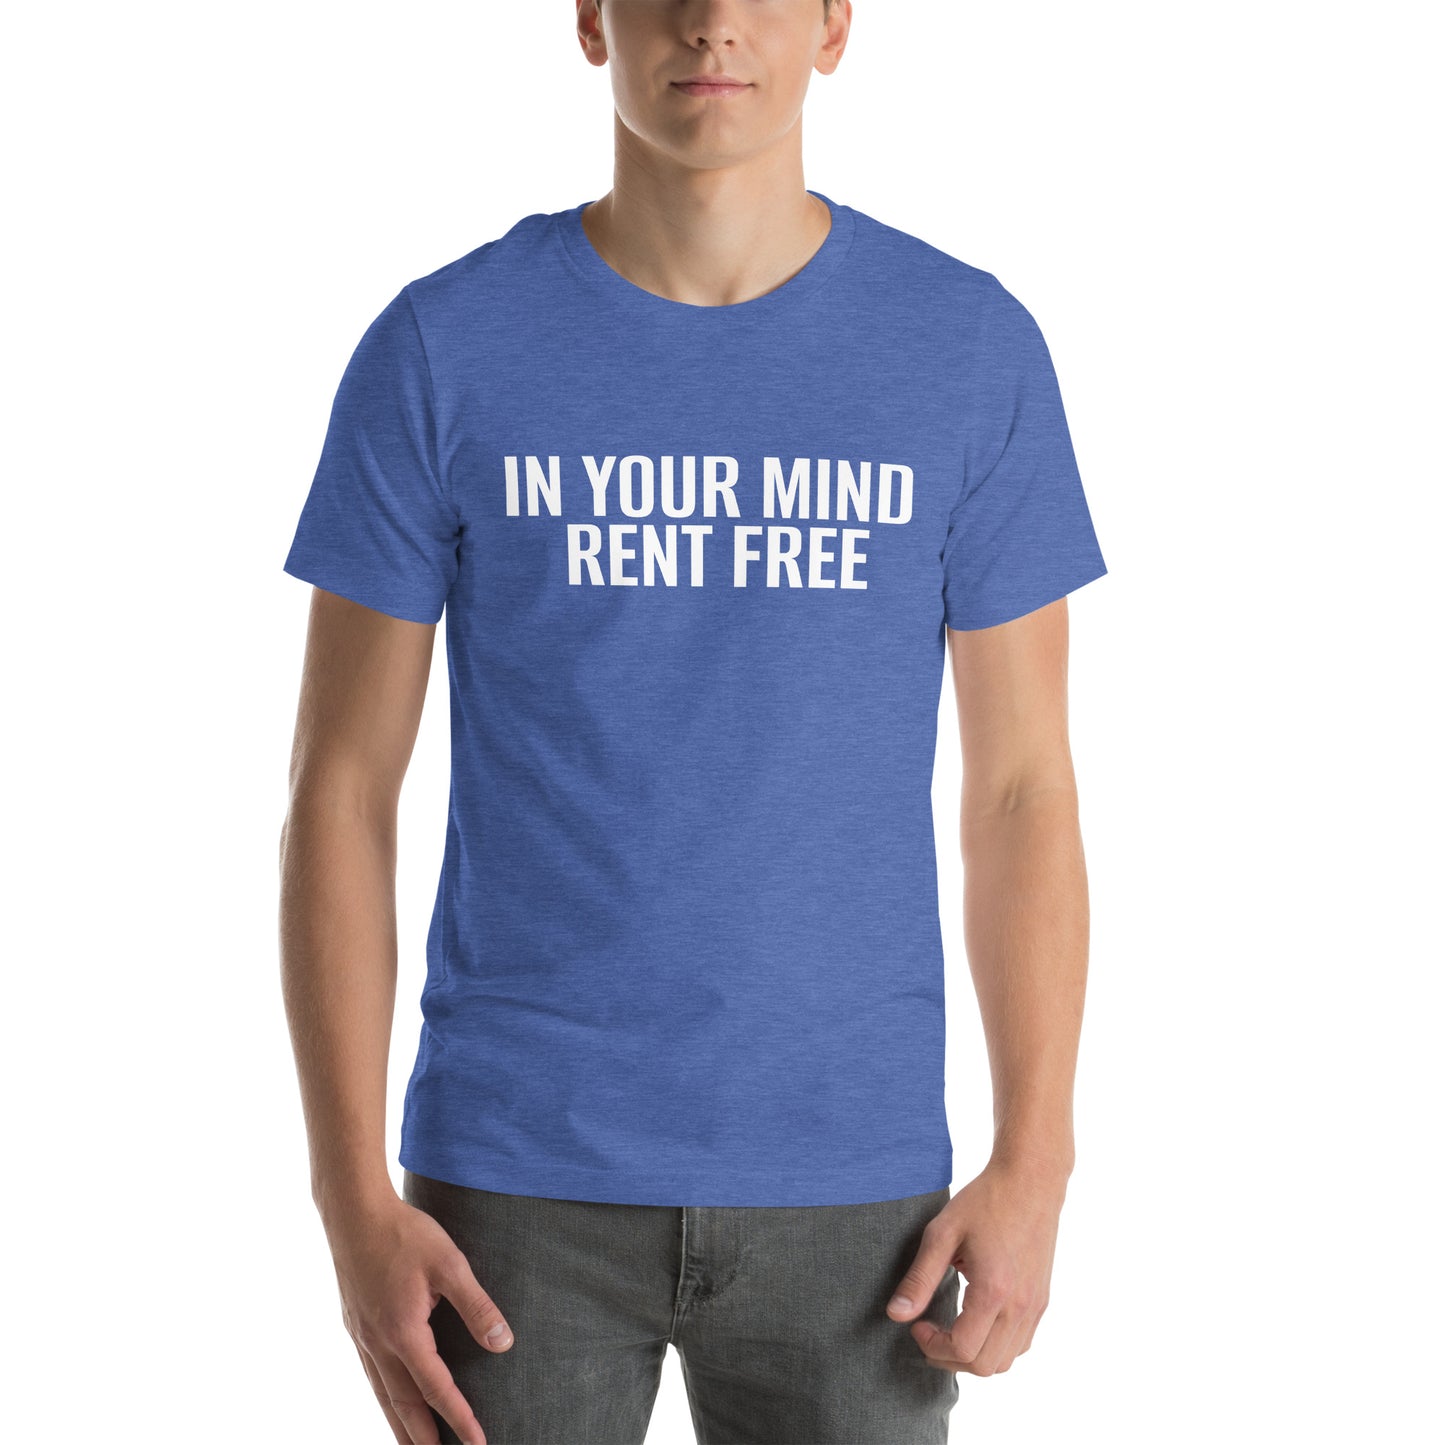 IN YOUR MIND RENT FREE  Unisex t-shirt